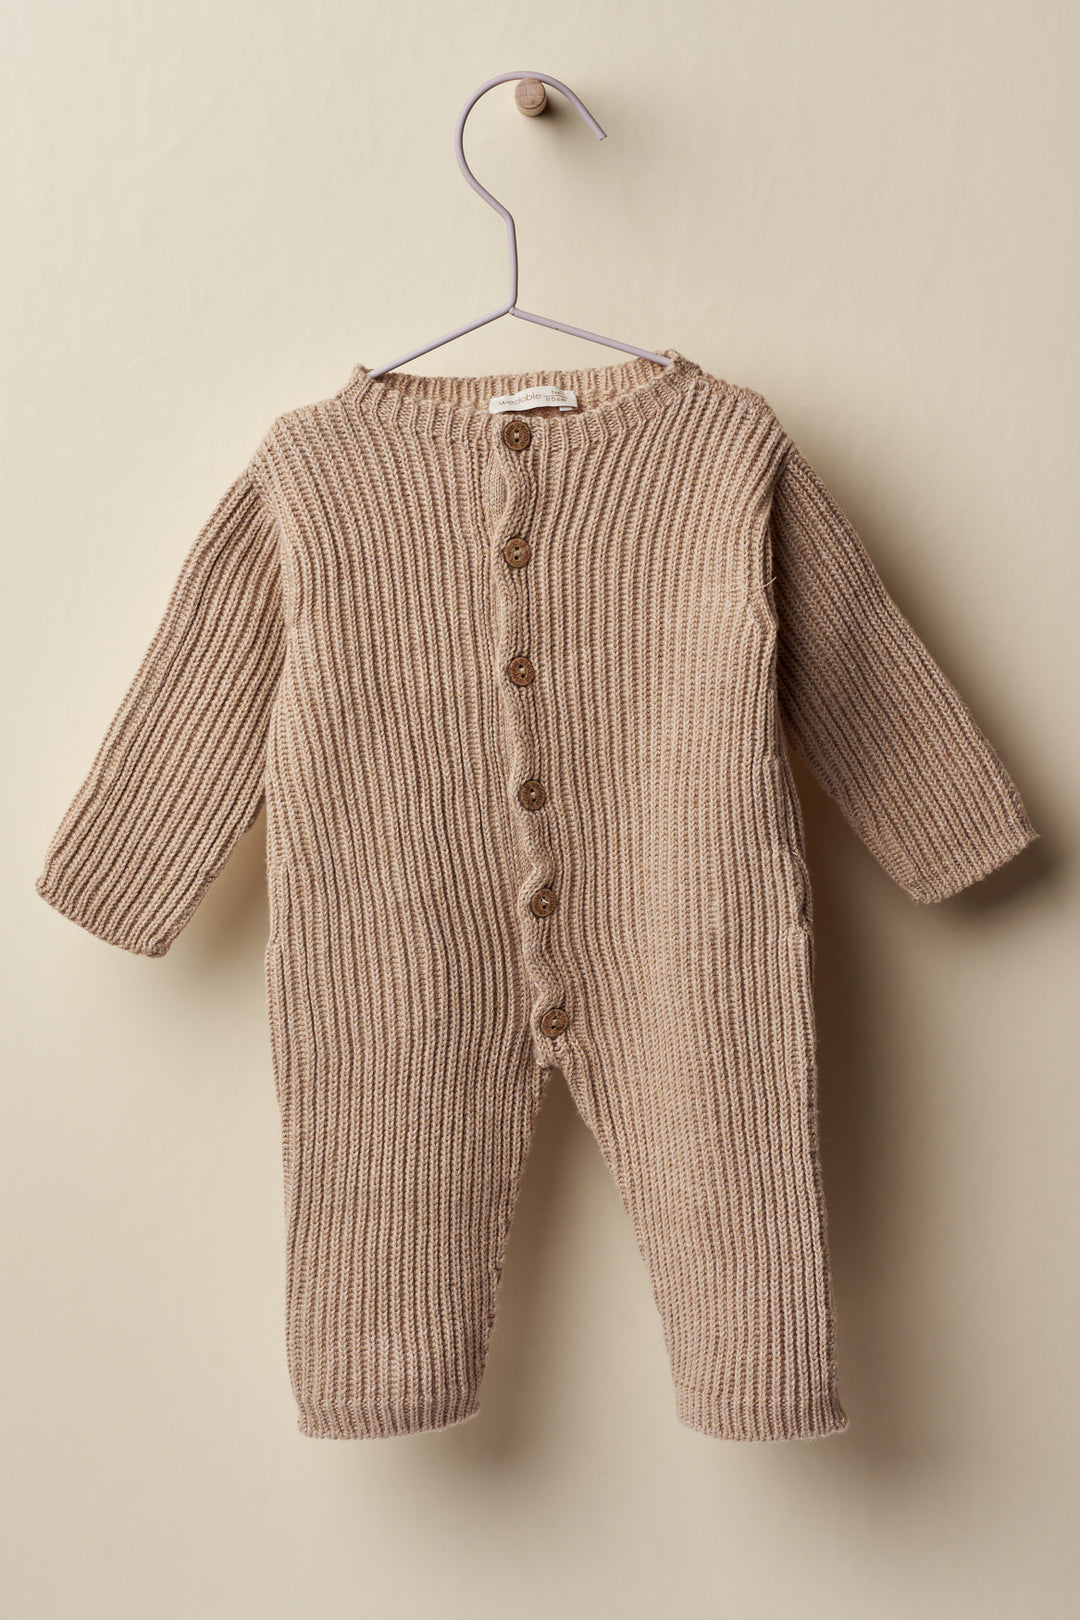 Wedoble "Lorcan" Camel Knitted Romper | Millie and John